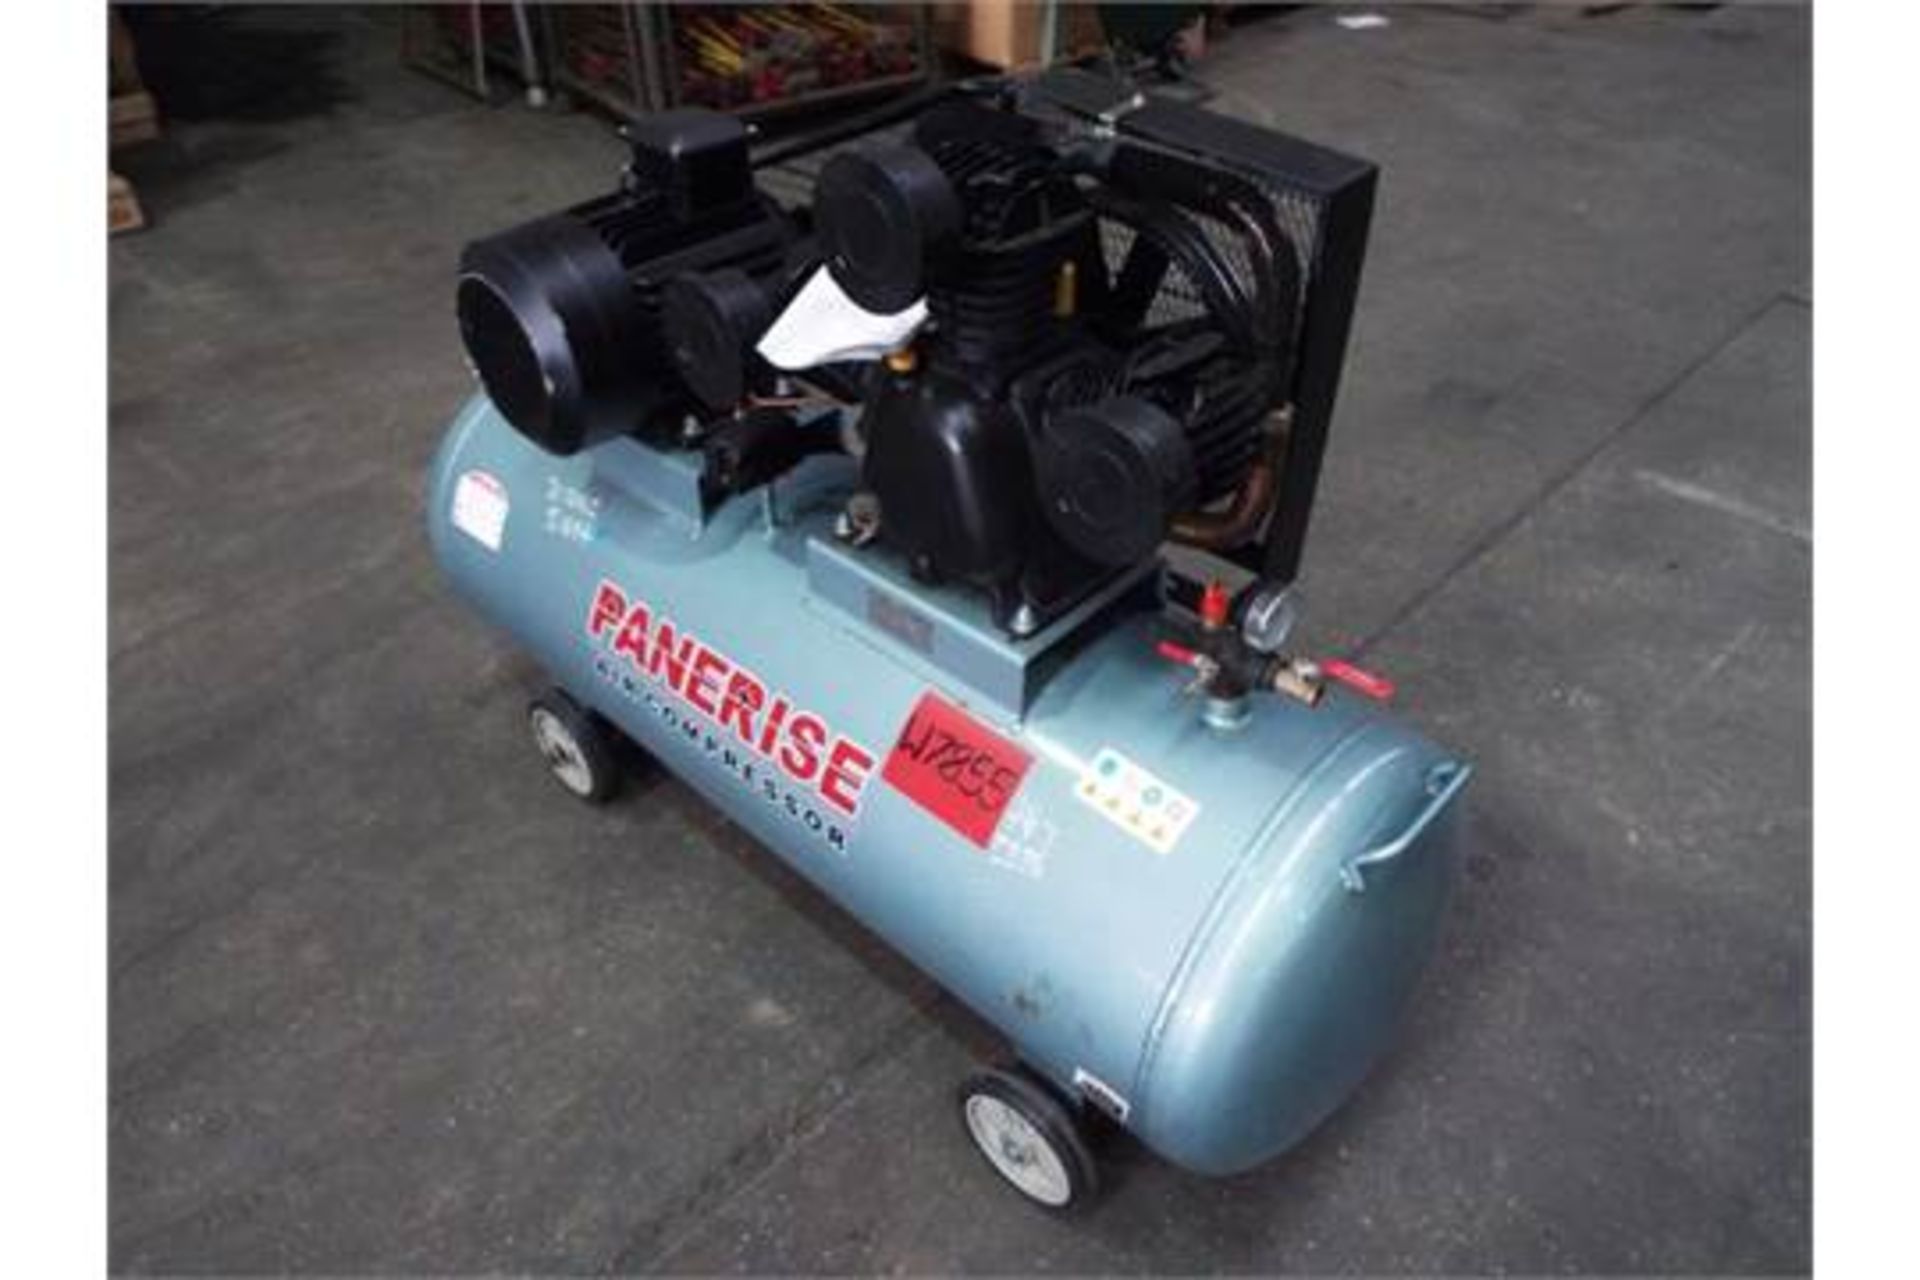 Unused Panerise PW3090A-300 10HP Air Compressor - Image 3 of 13